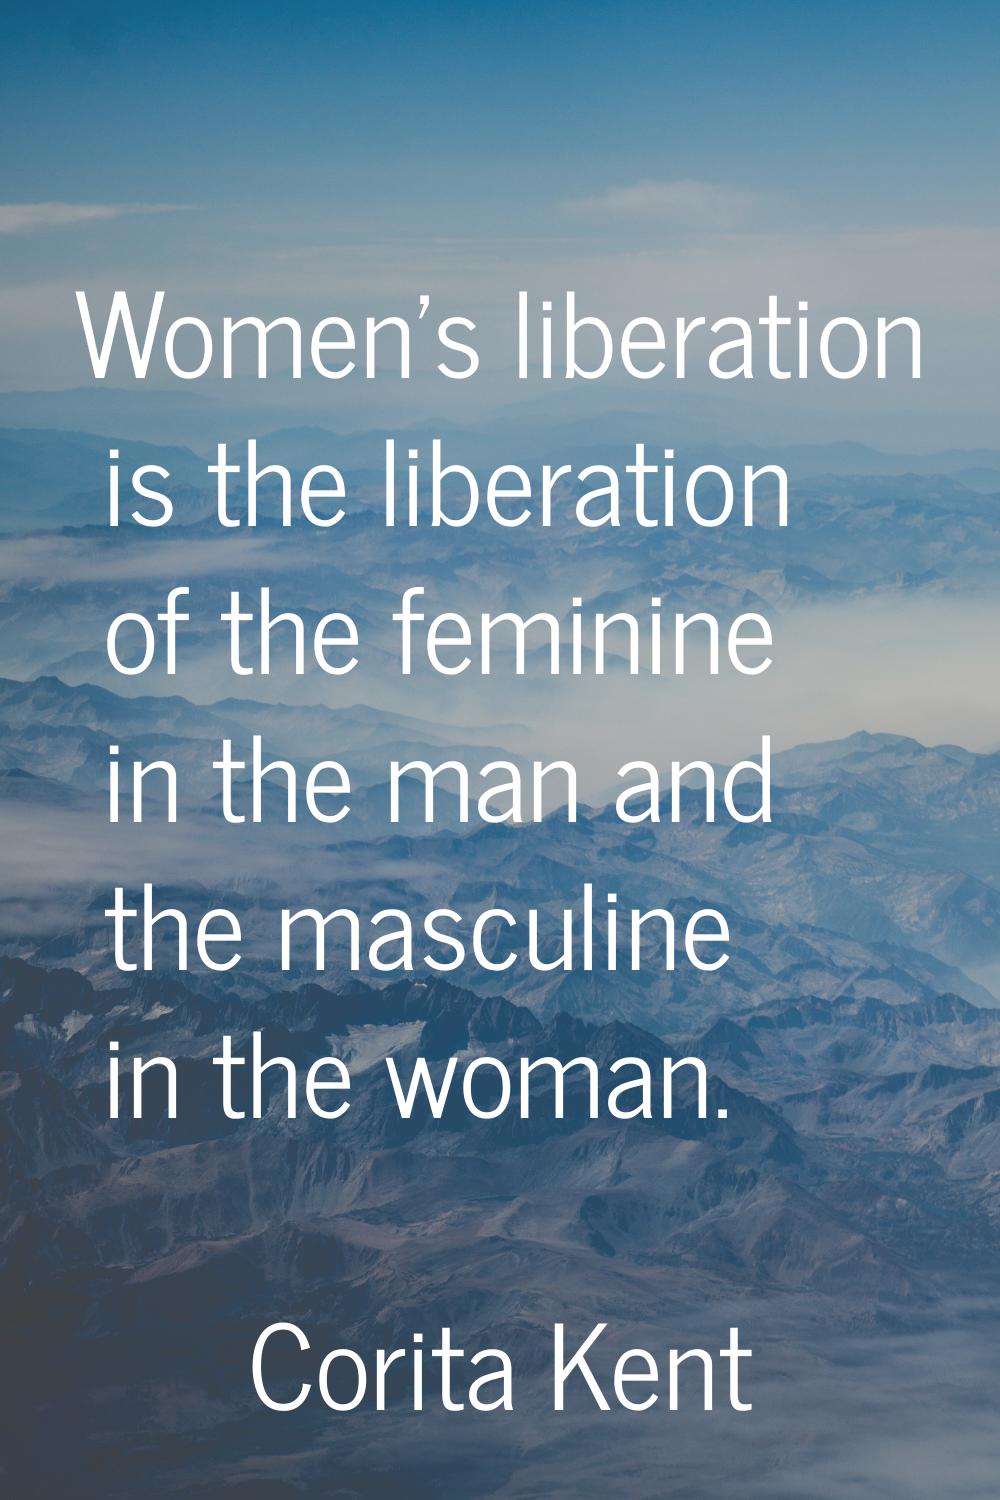 Women's liberation is the liberation of the feminine in the man and the masculine in the woman.